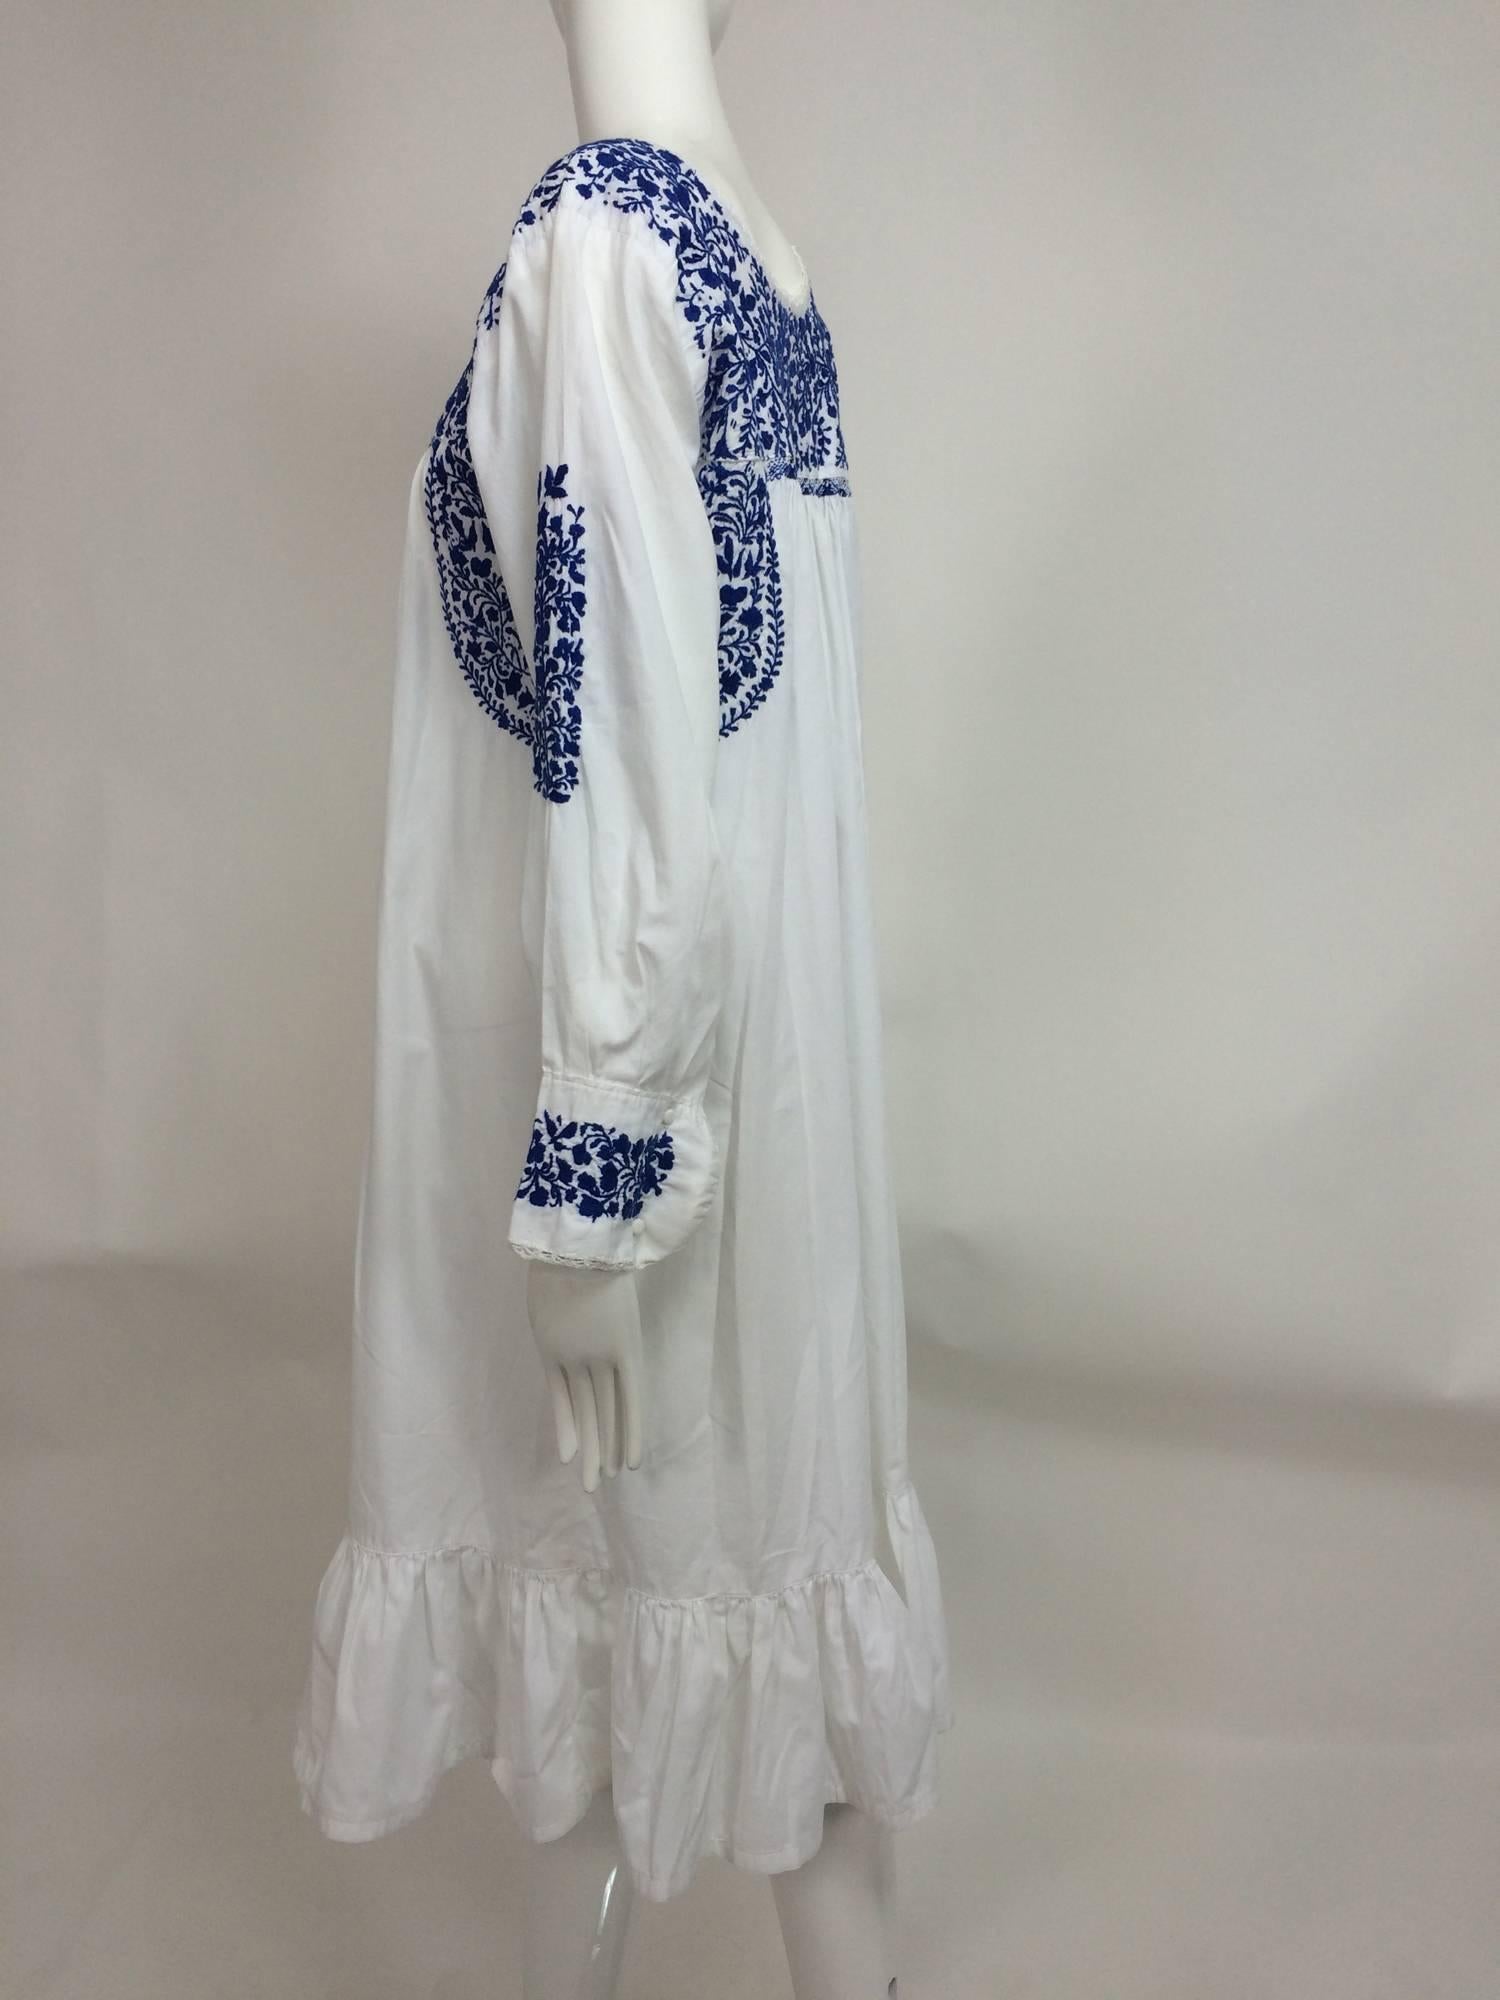 Women's 1960s blue & white embroidered Oaxacan Mexican wedding dress vintage